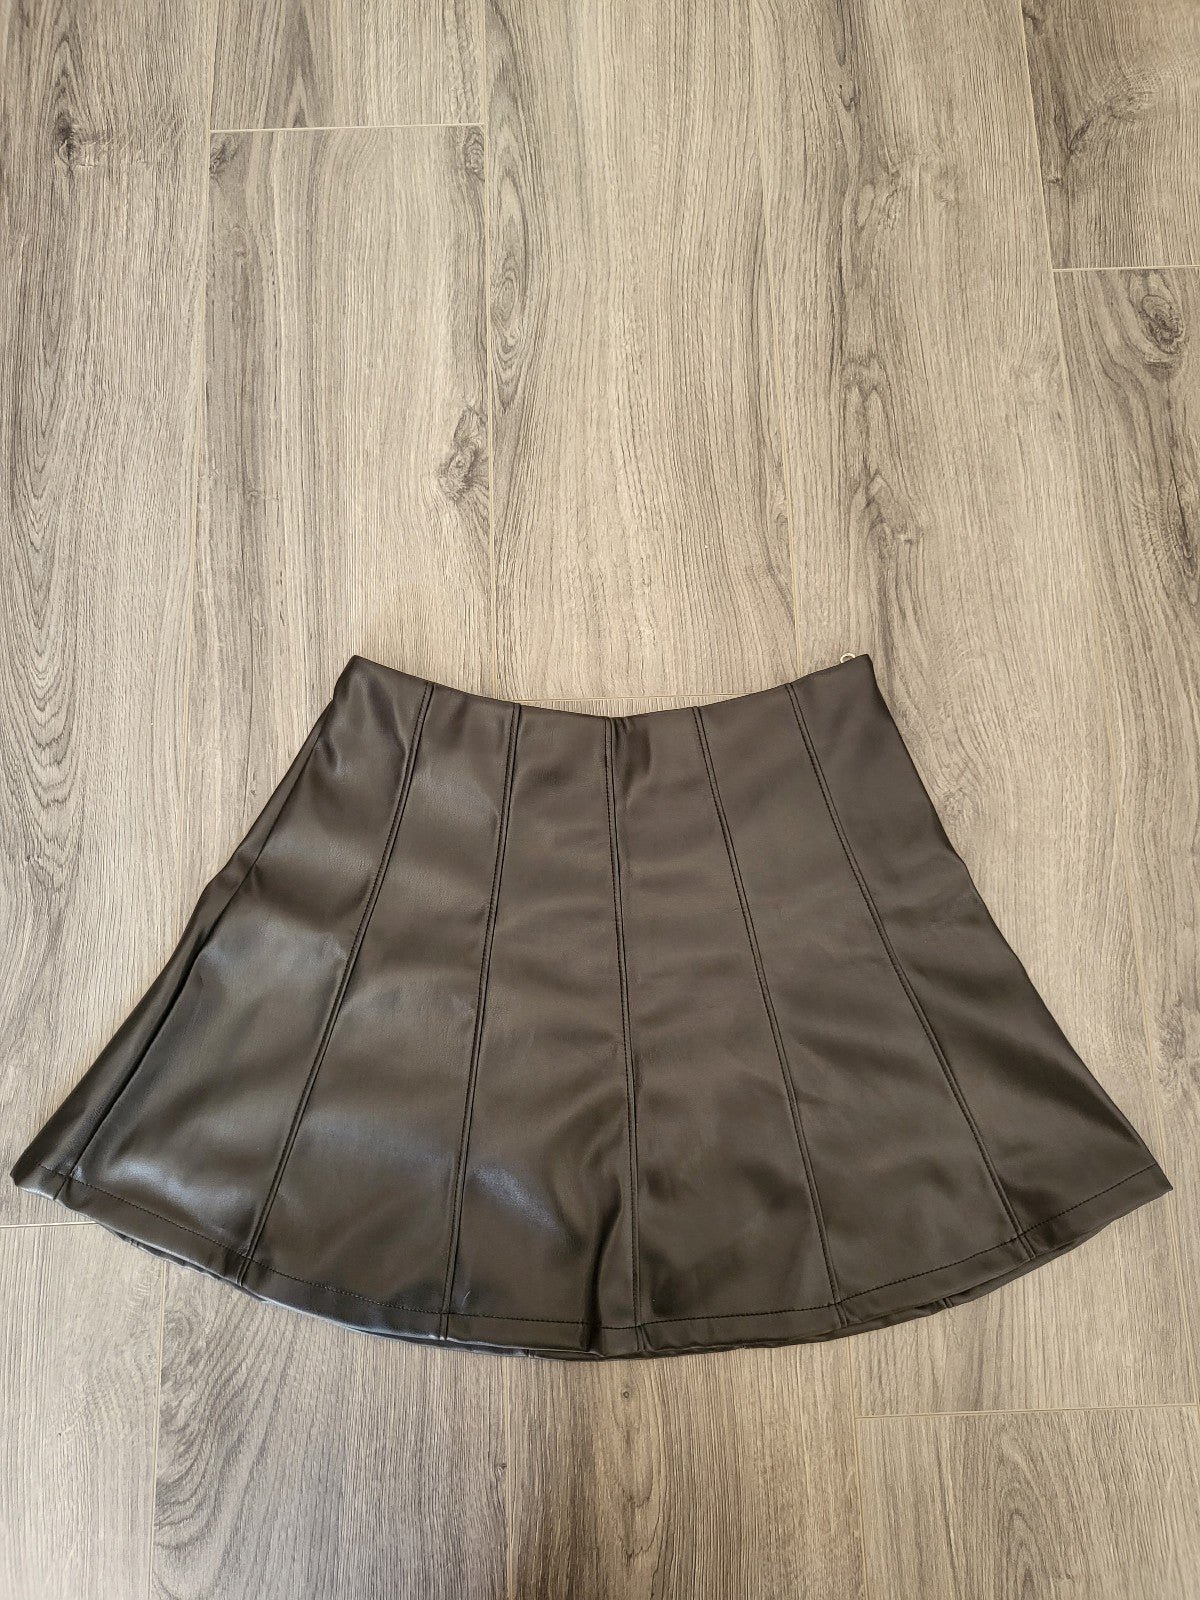 big discount Black Faux Leather Skirt nvx0nxtcH Low Price